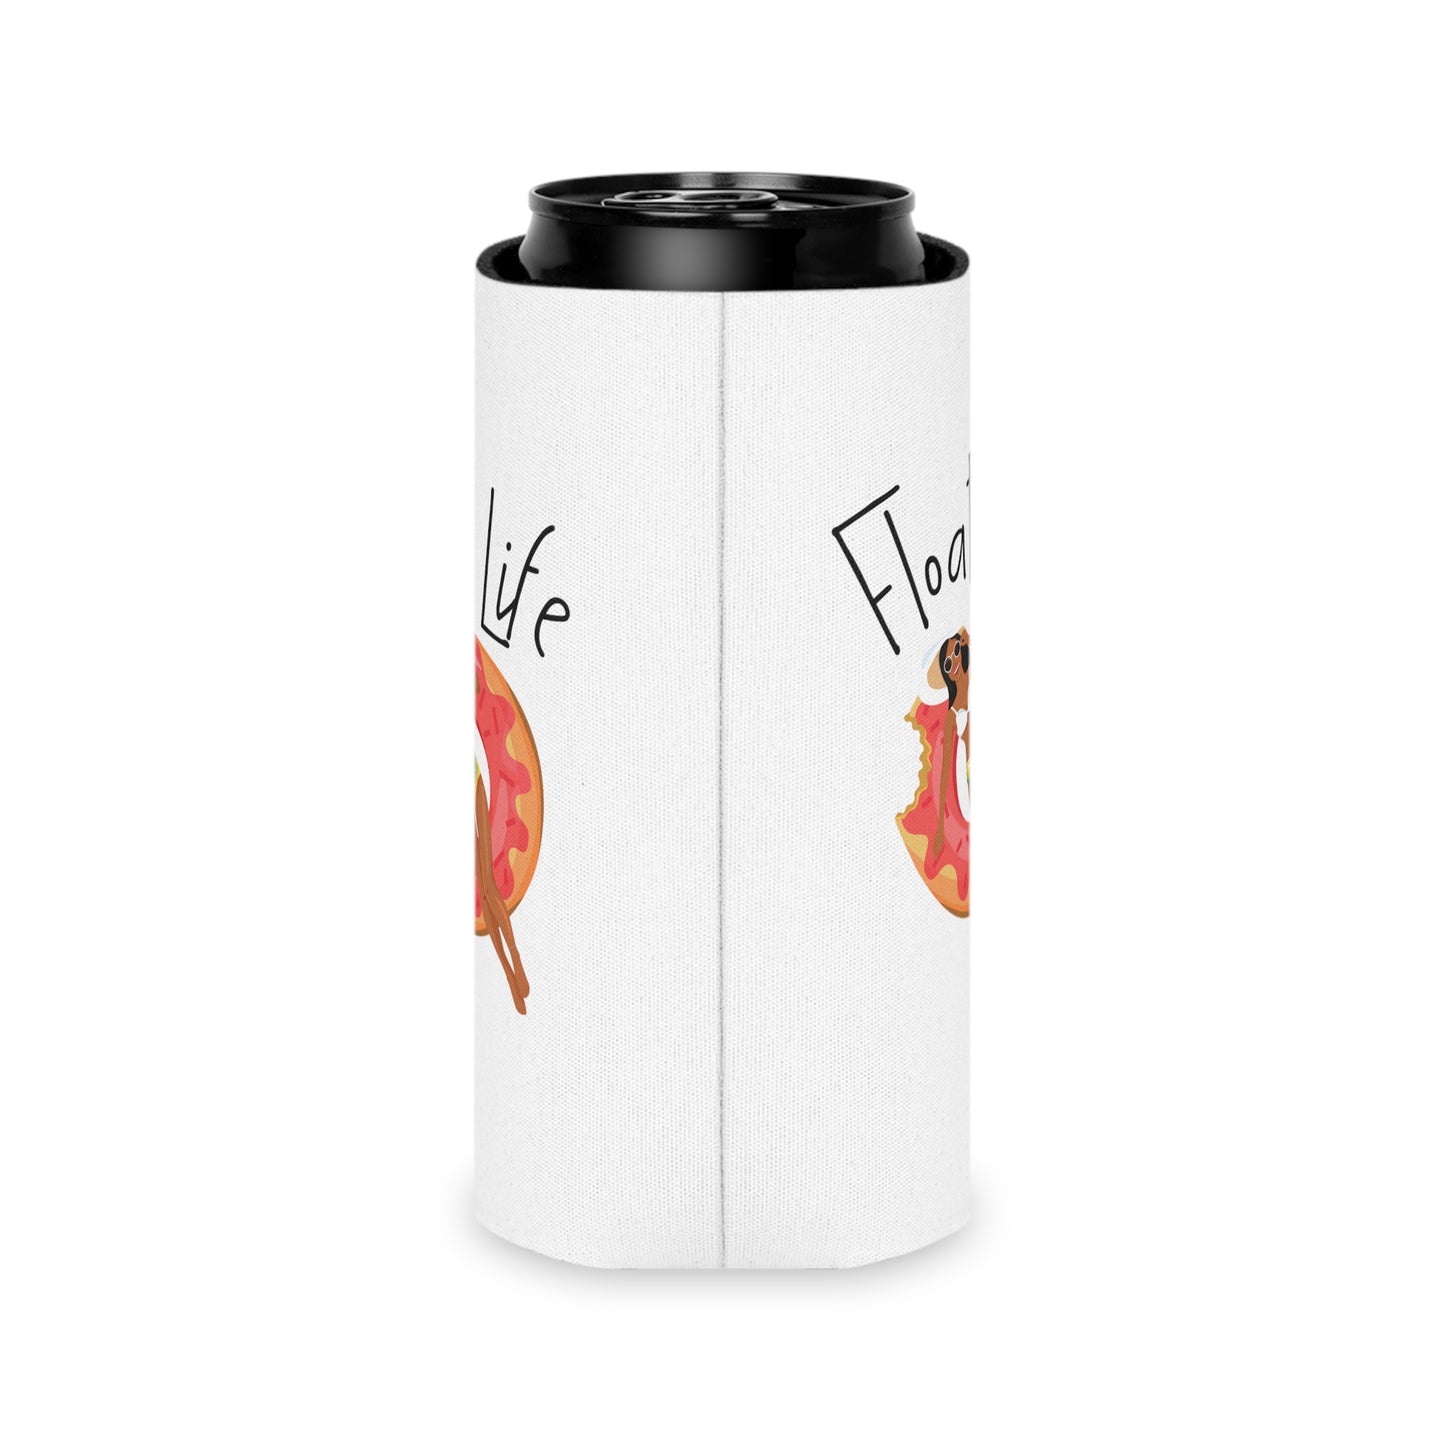 Float Life Can Cooler